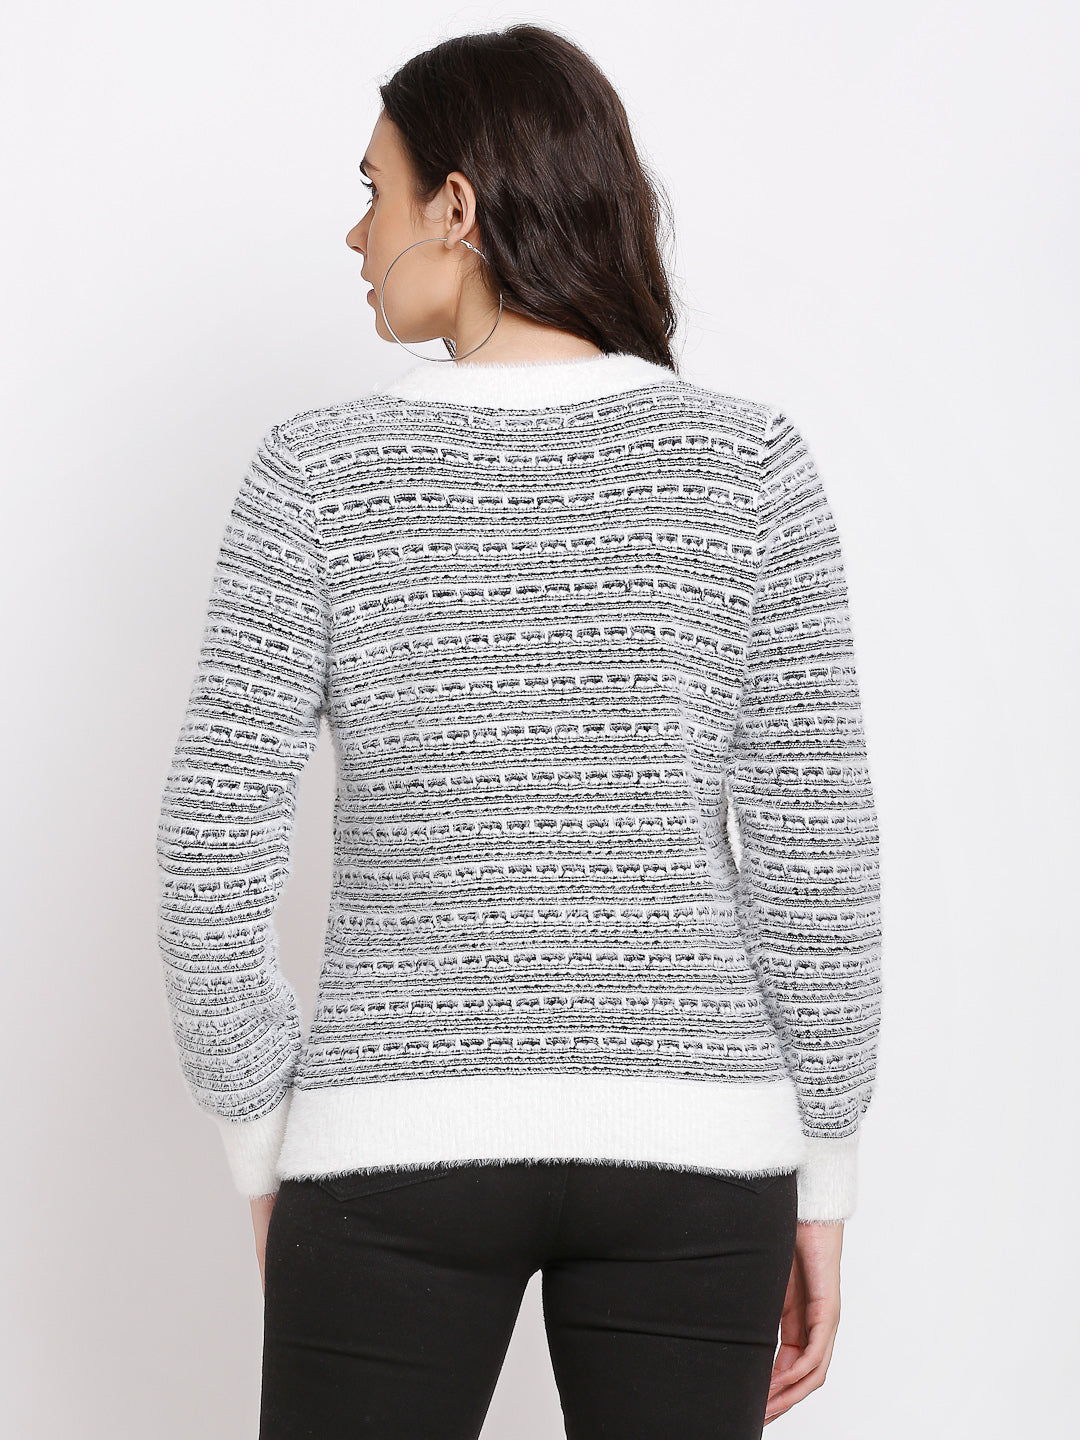 Knitted Printed Round Neck Pullover With Black